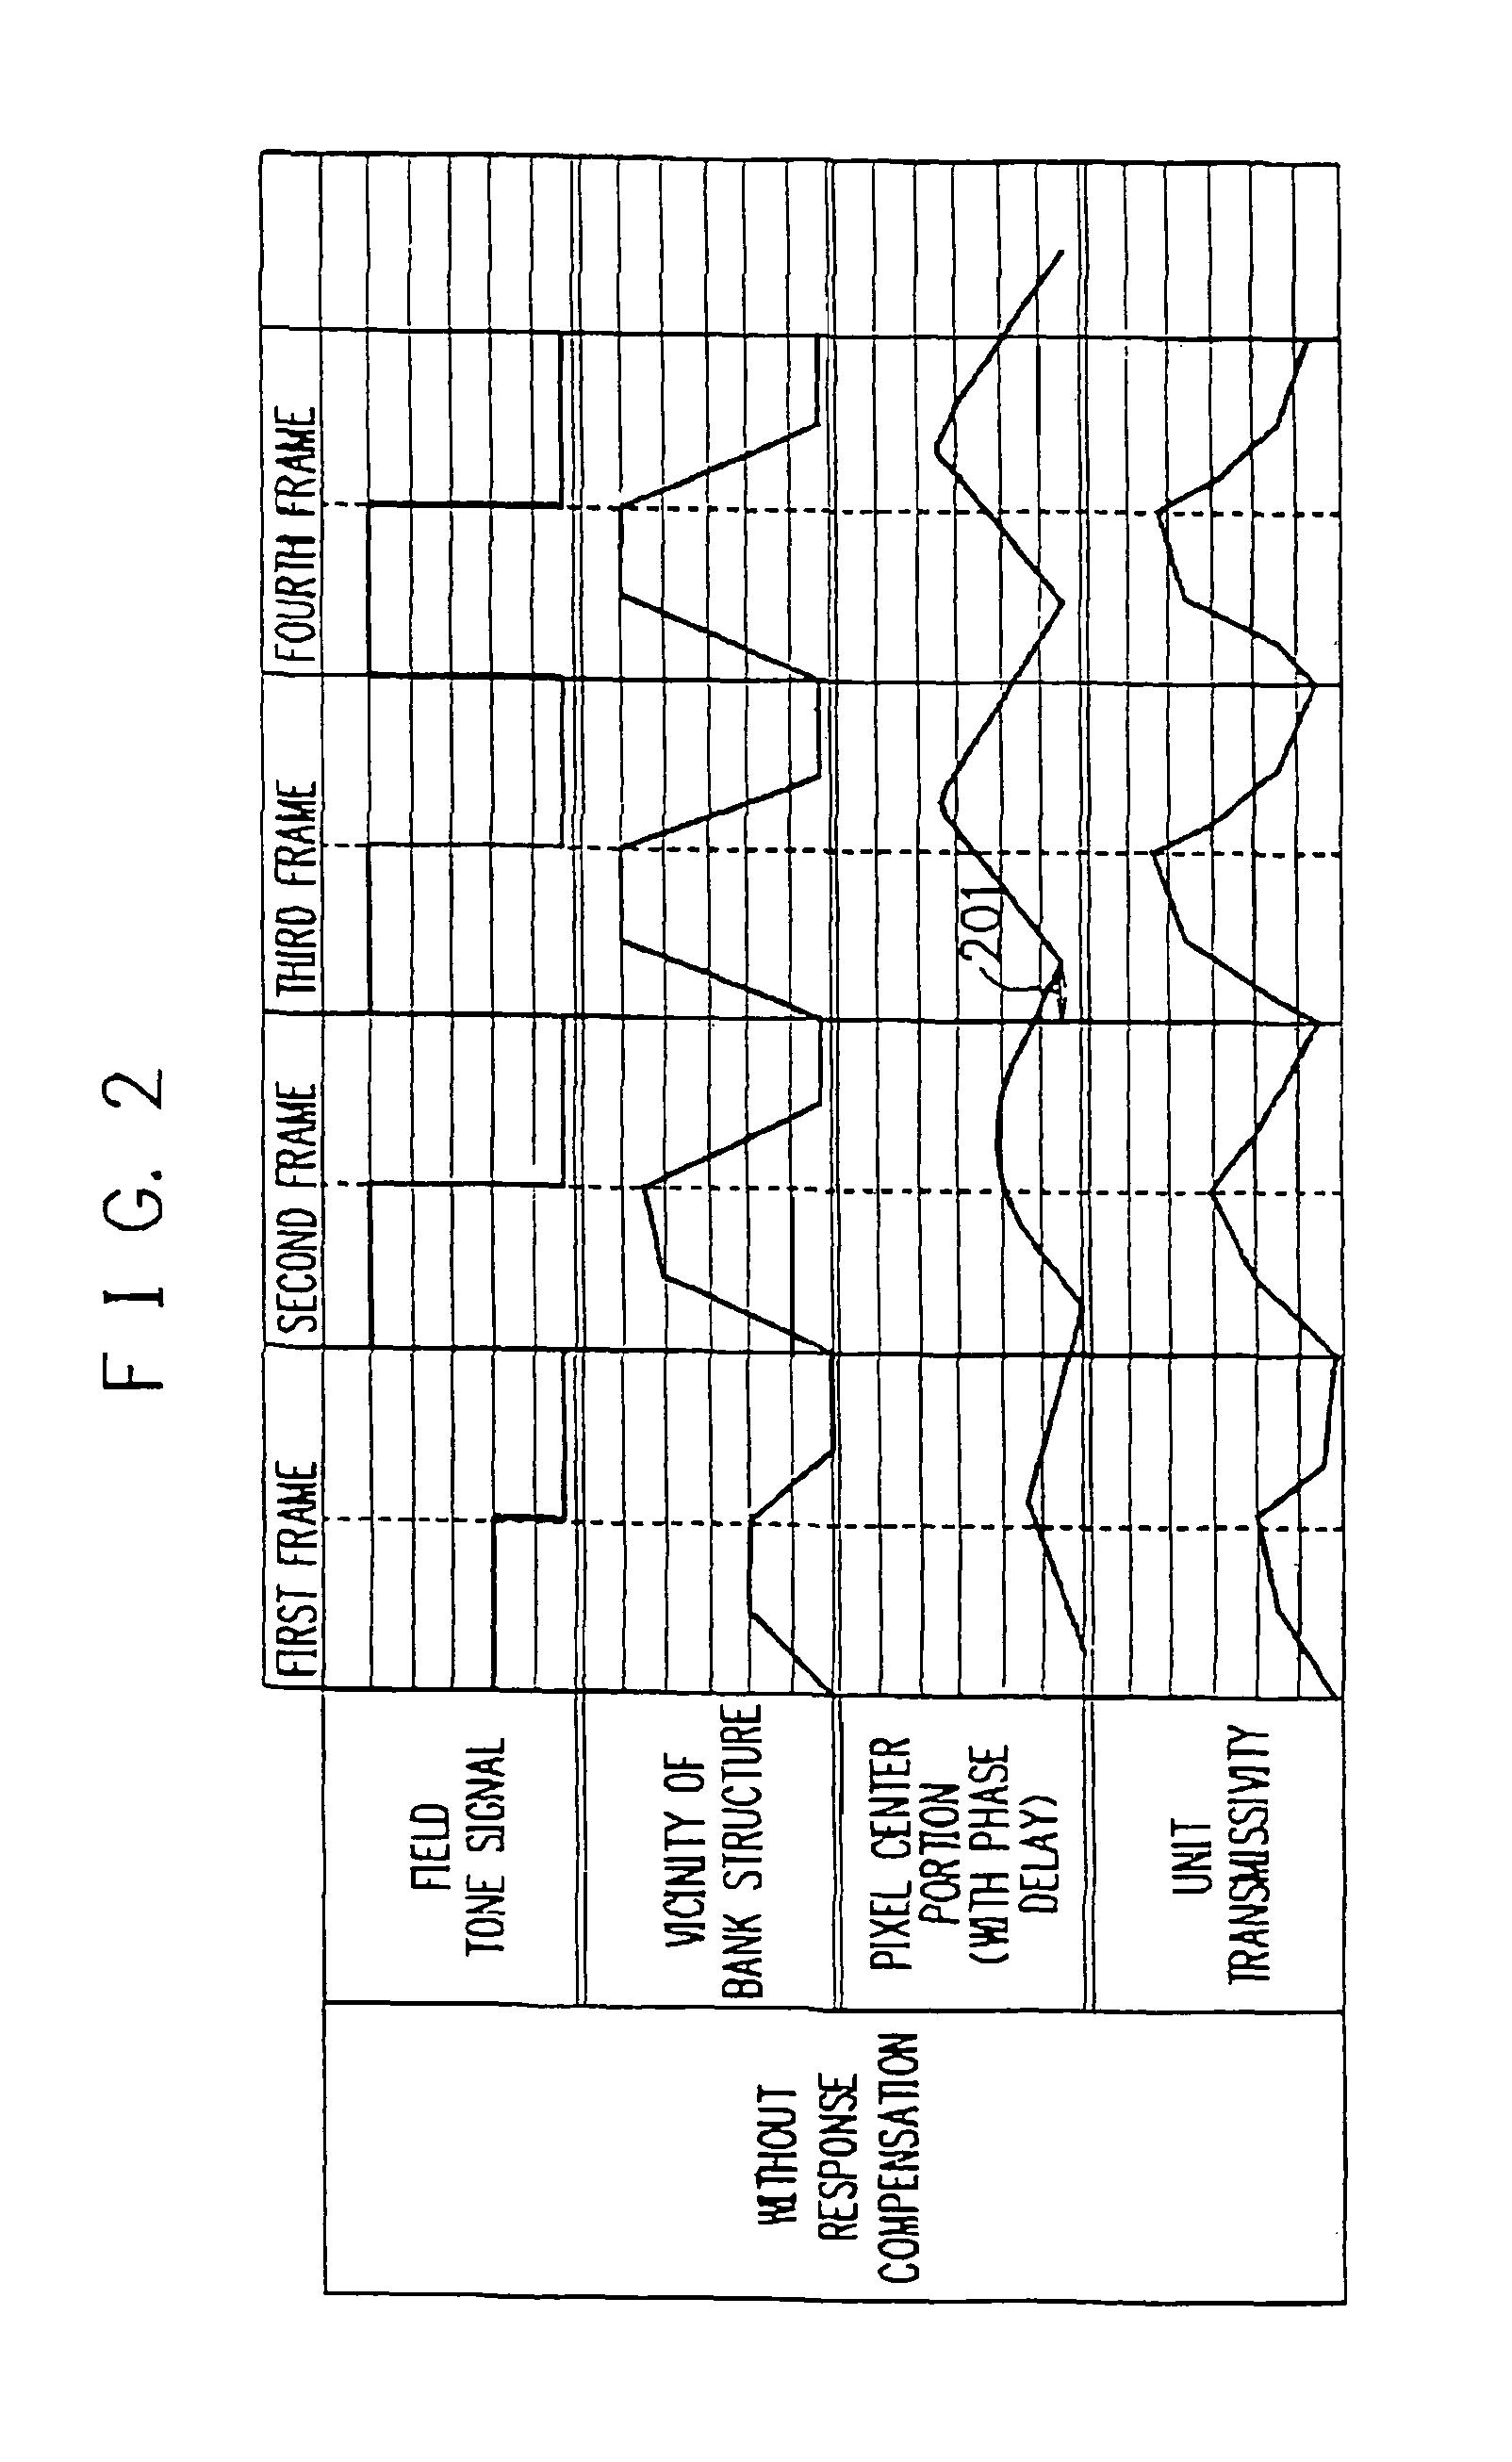 Liquid crystal display device having a plurality of subfields